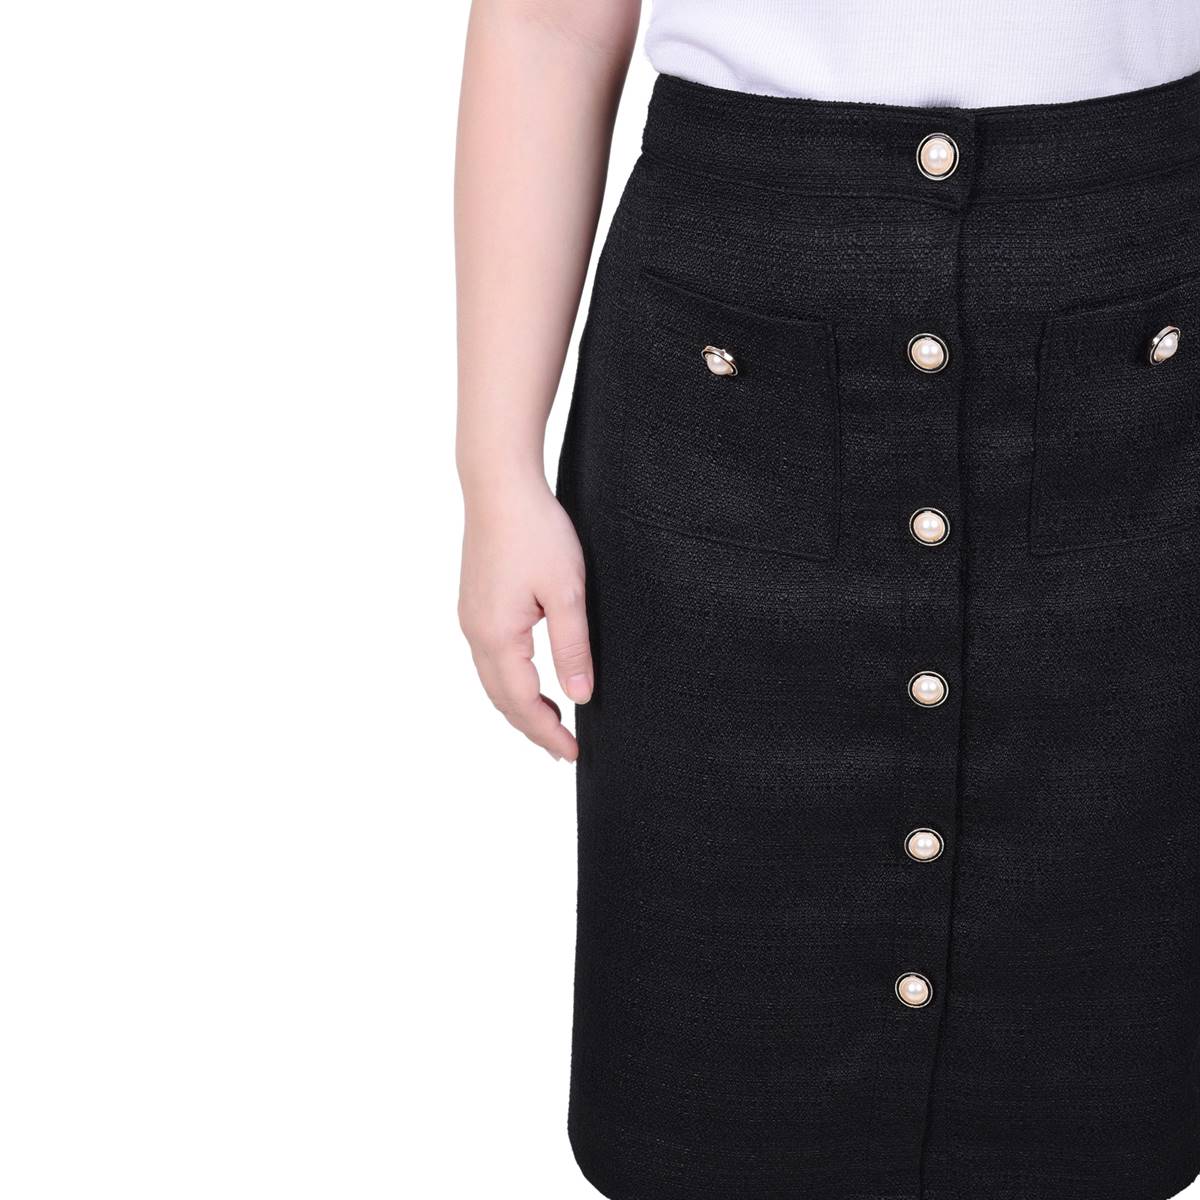 Womens NY Collection Tweed Pull On Skirt With Pearl Button